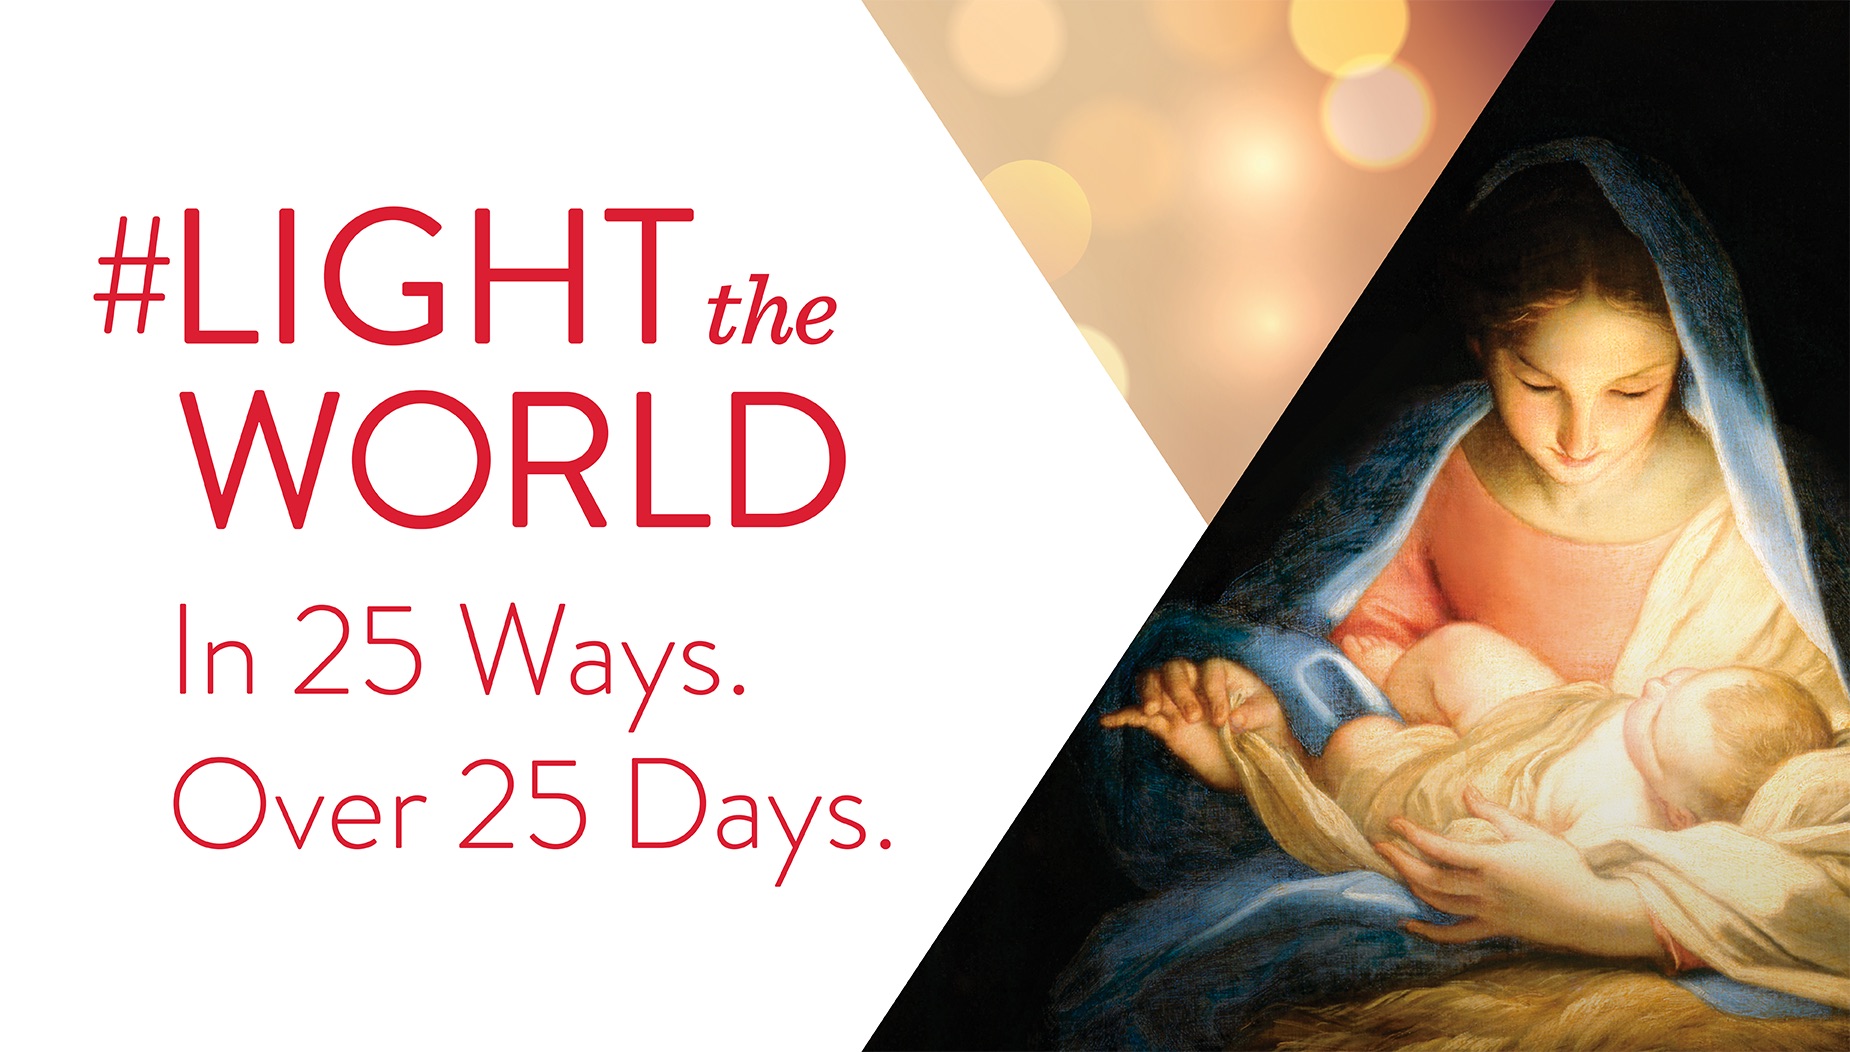 Looking for ways to serve this holiday season? Join with millions to Light the World through service this Christmas season.